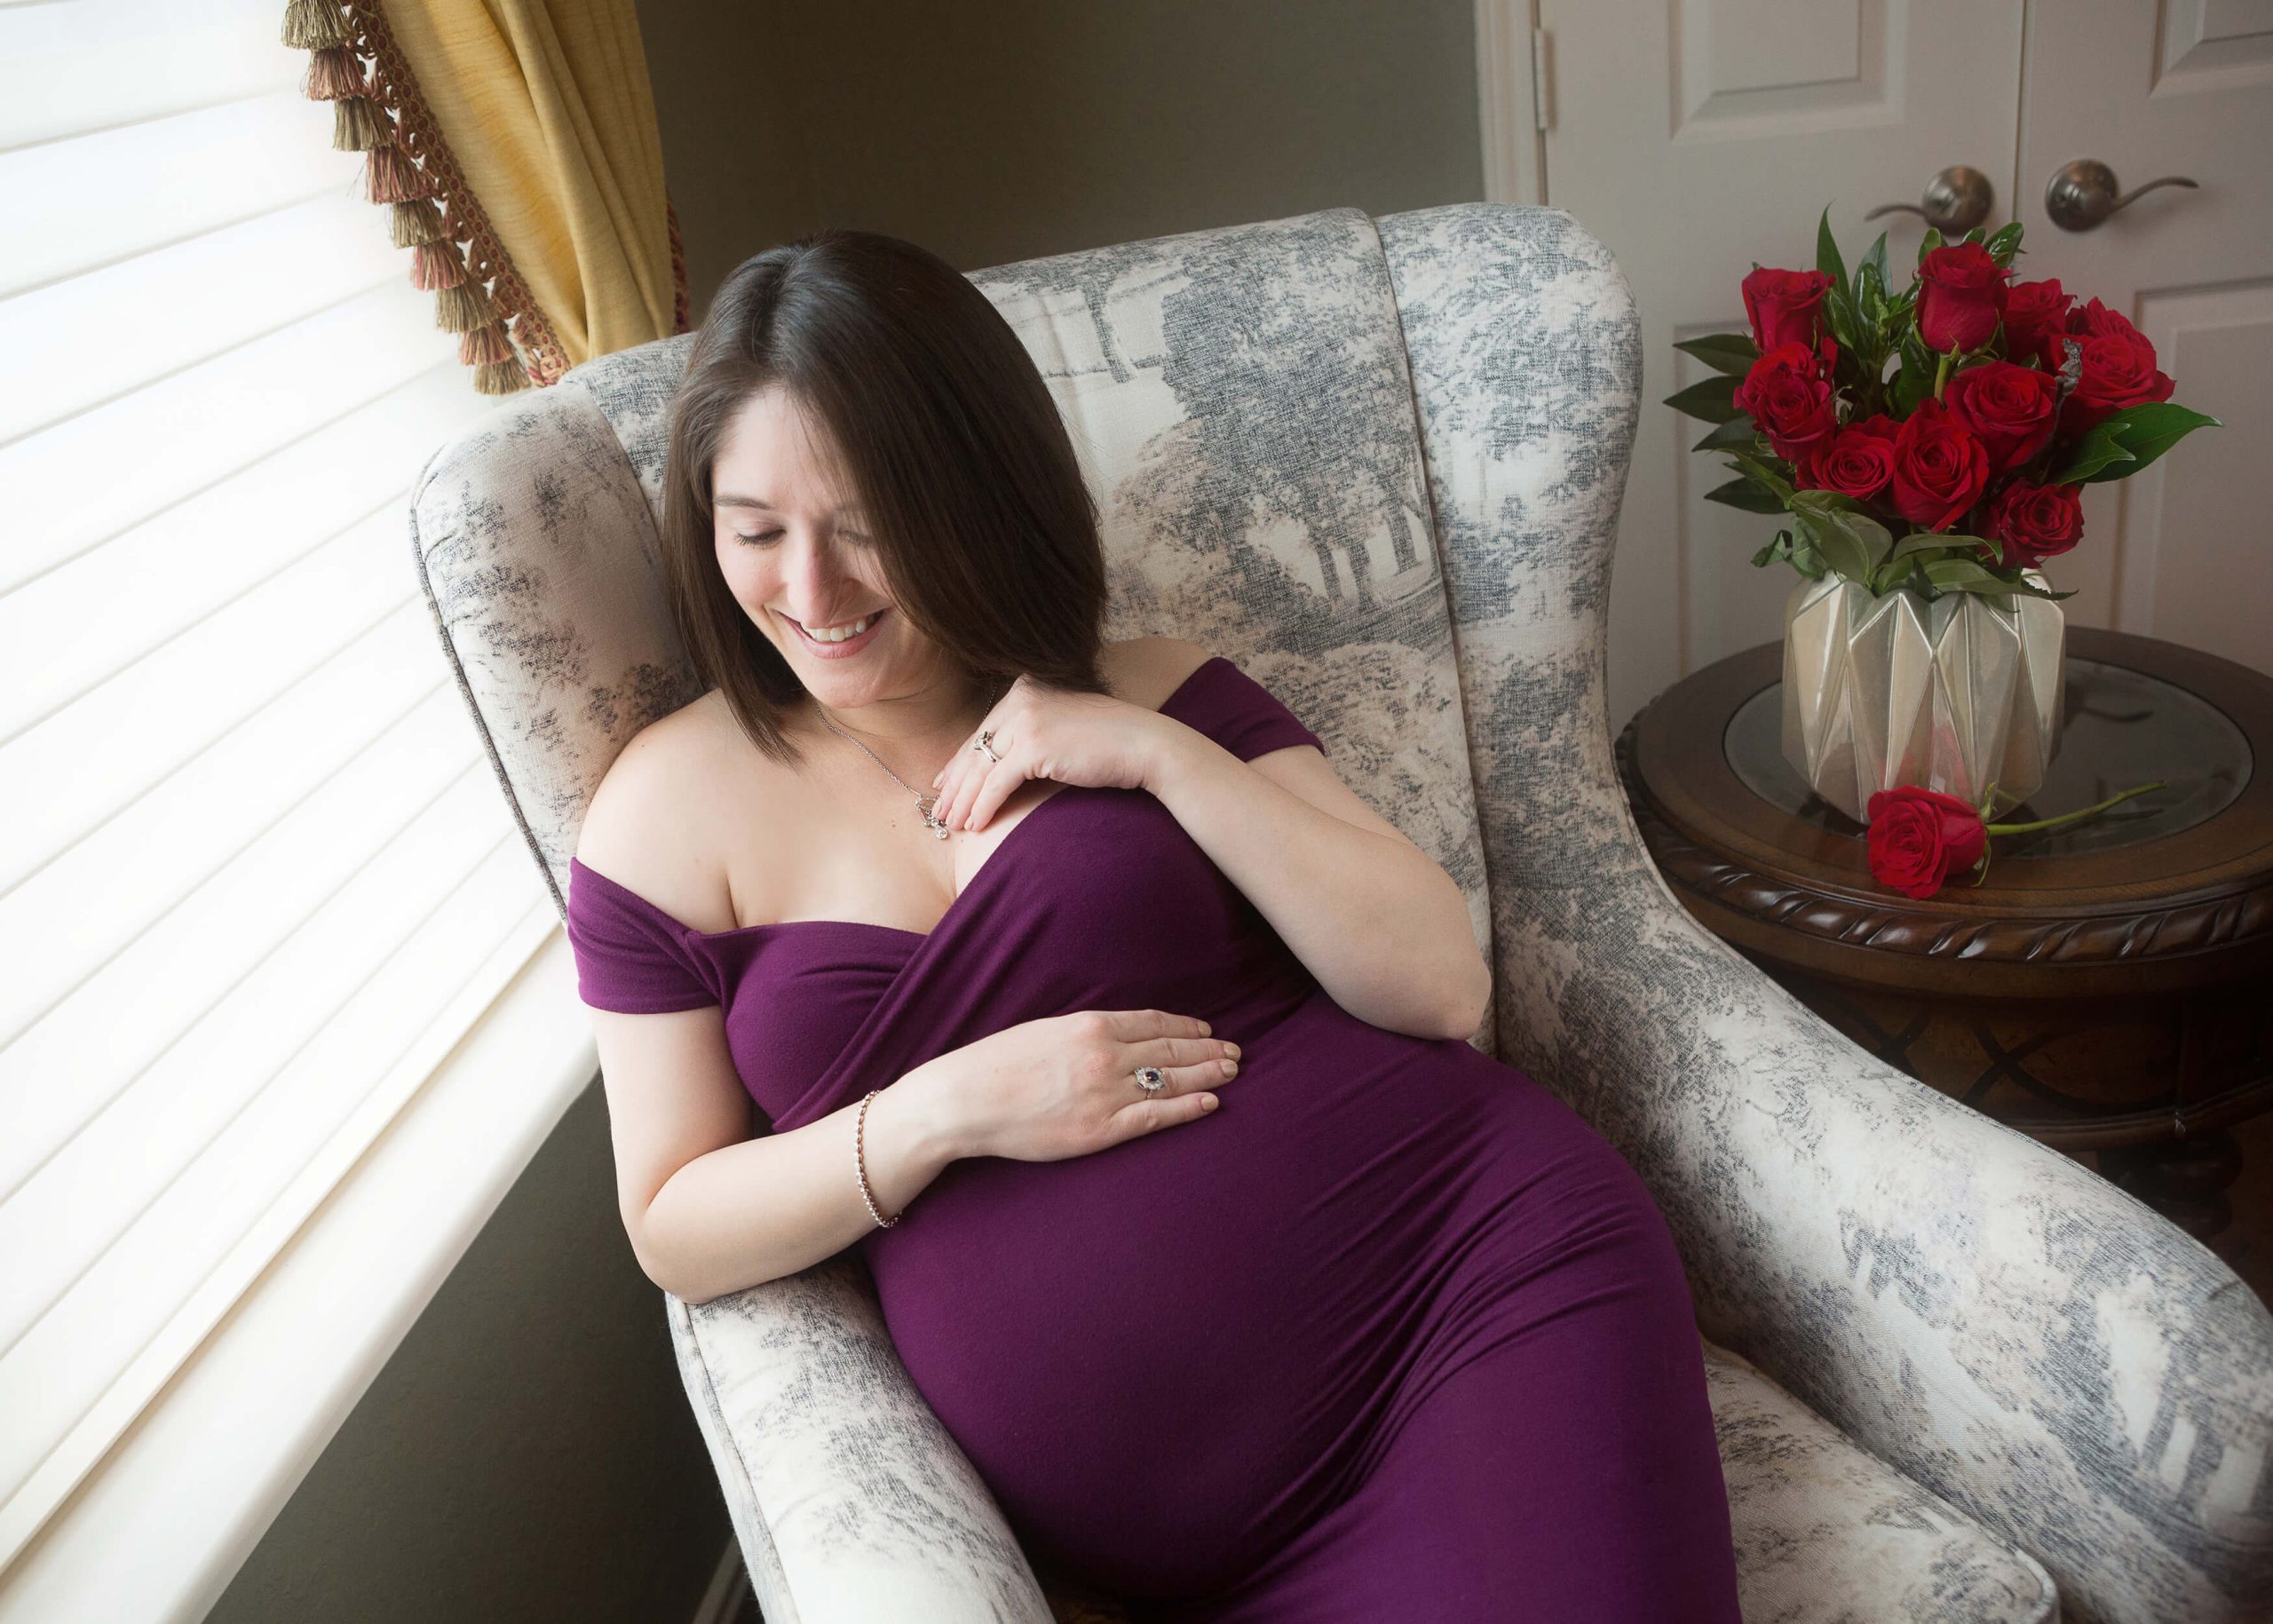 A pregnant woman in a purple dress sitting in a chair.